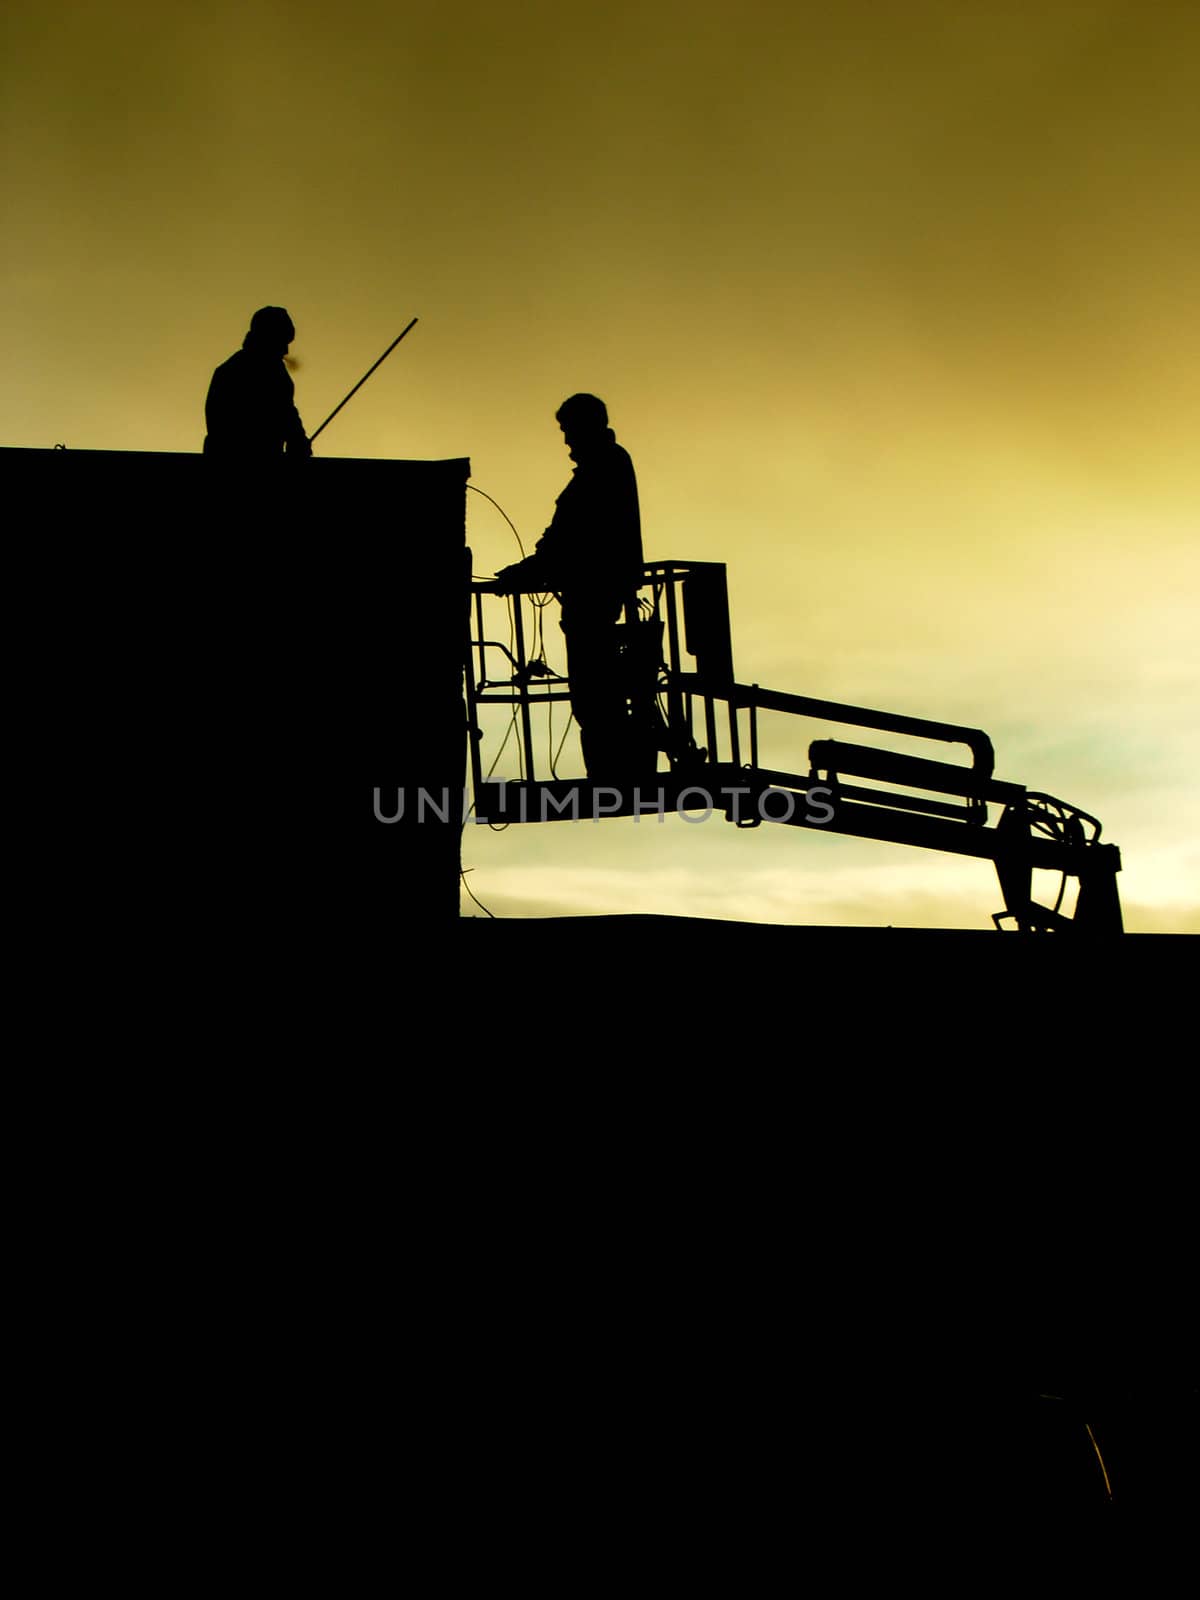 Silhouettes of men working at night.
They are working on a roof, one worker is in a lift